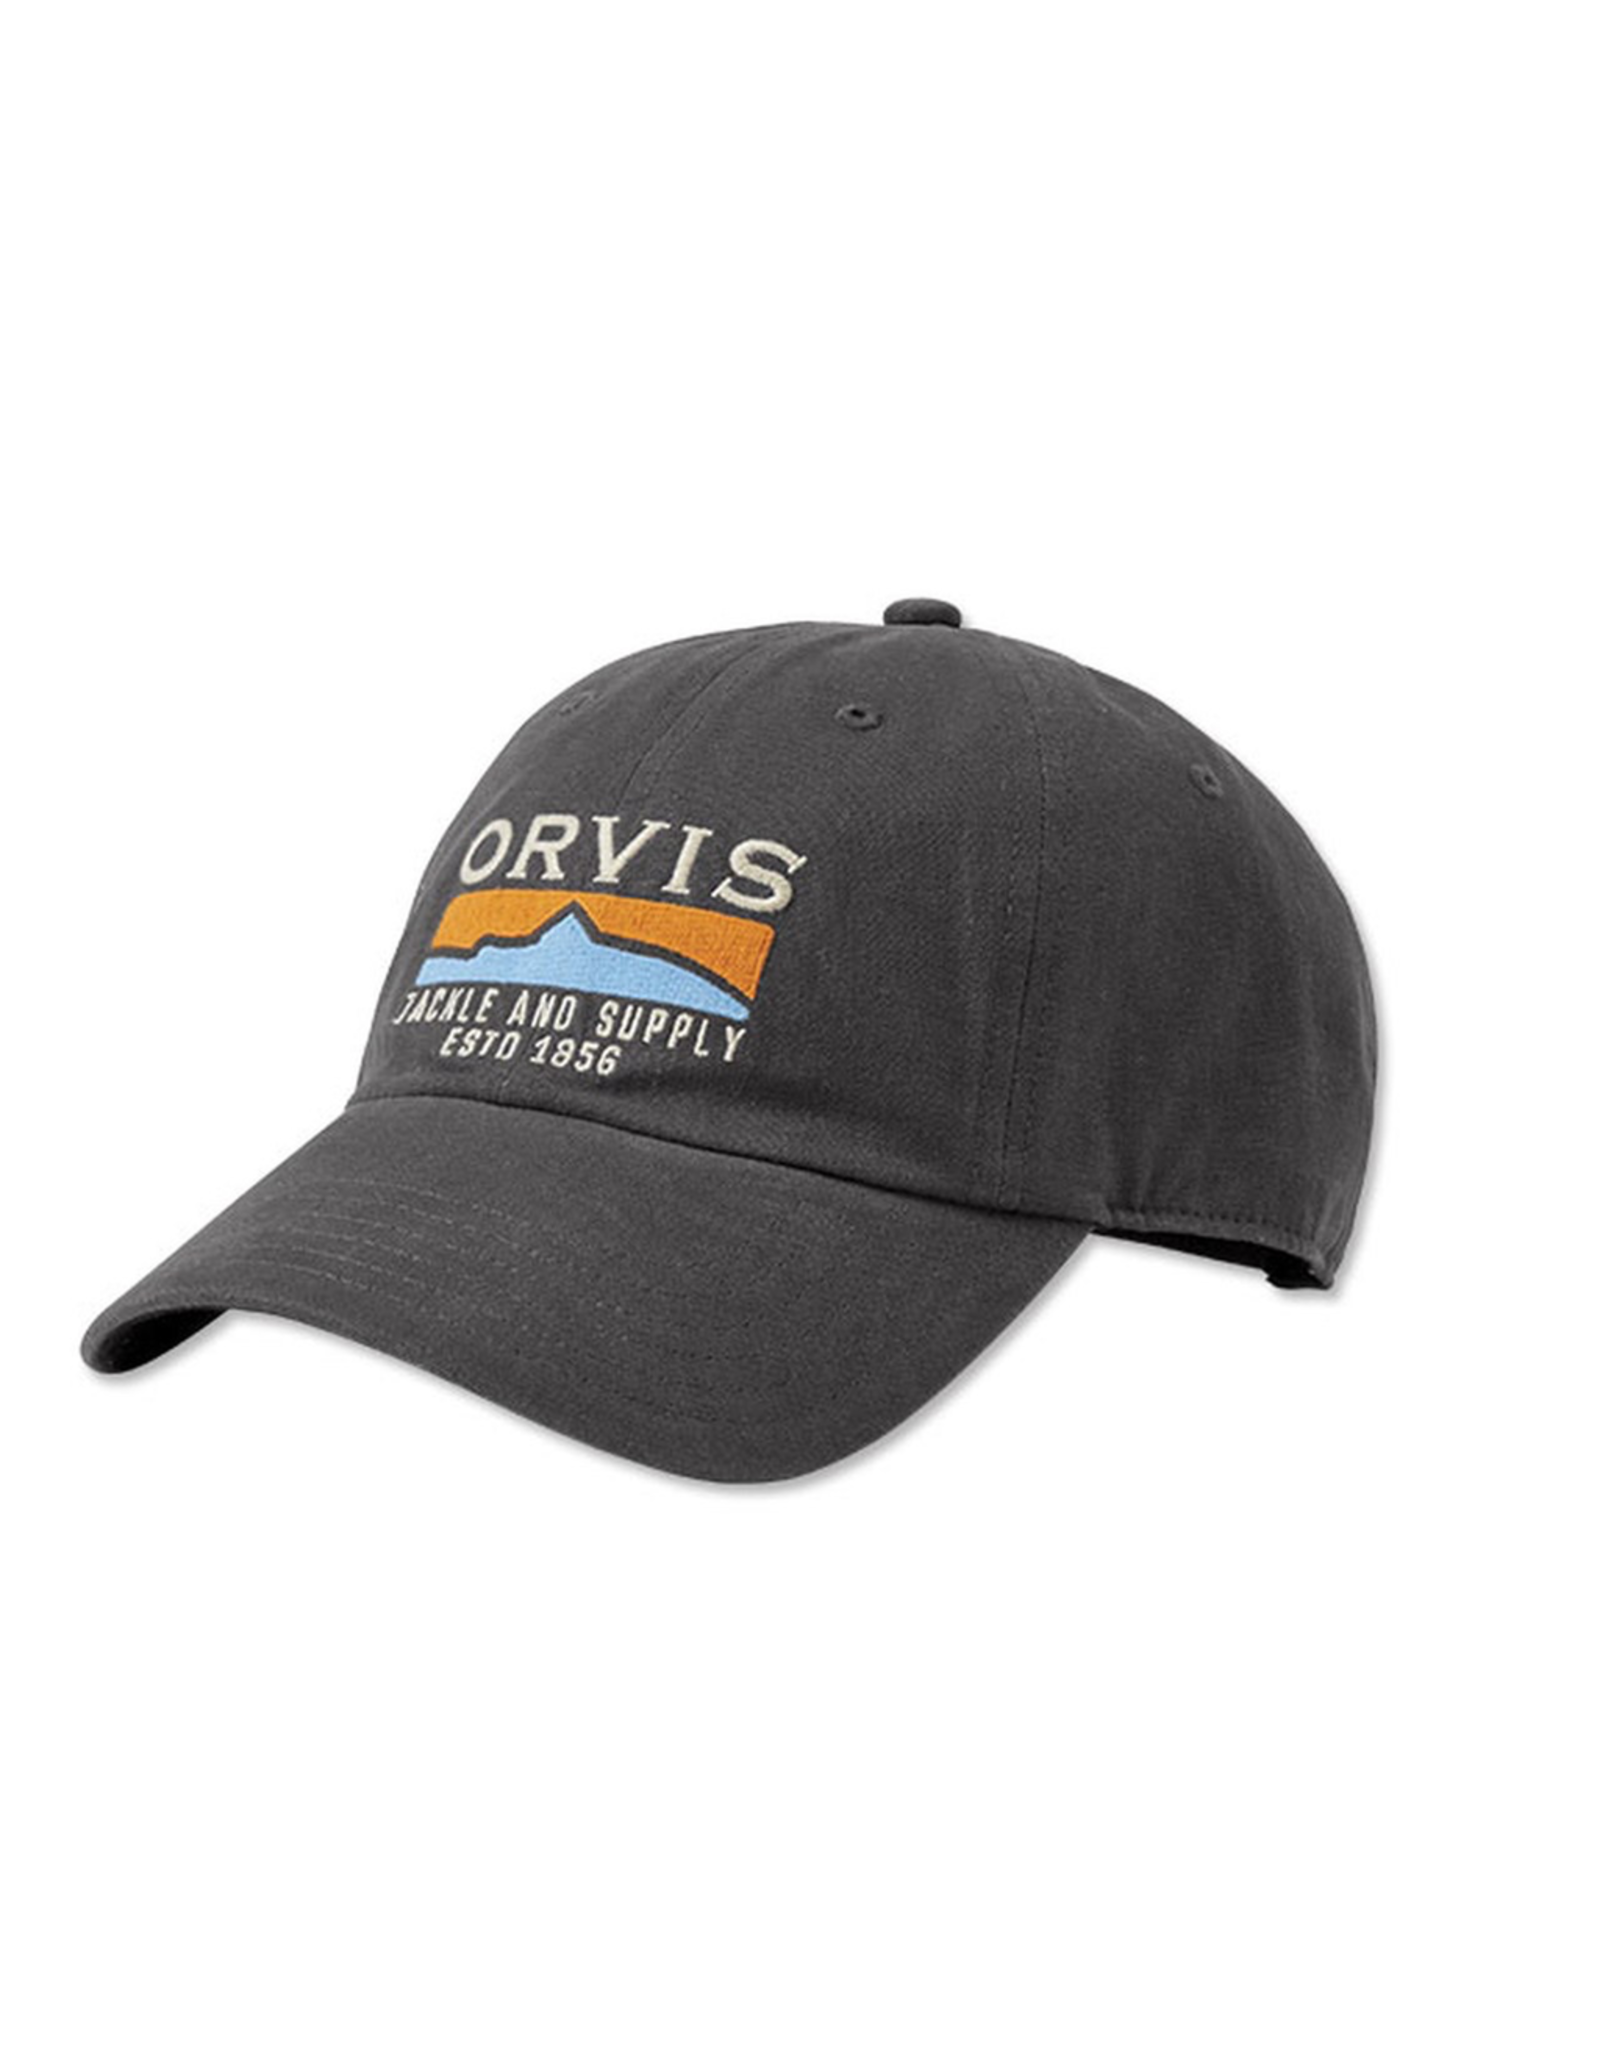 Orvis Orvis Tackle and Supply Cap